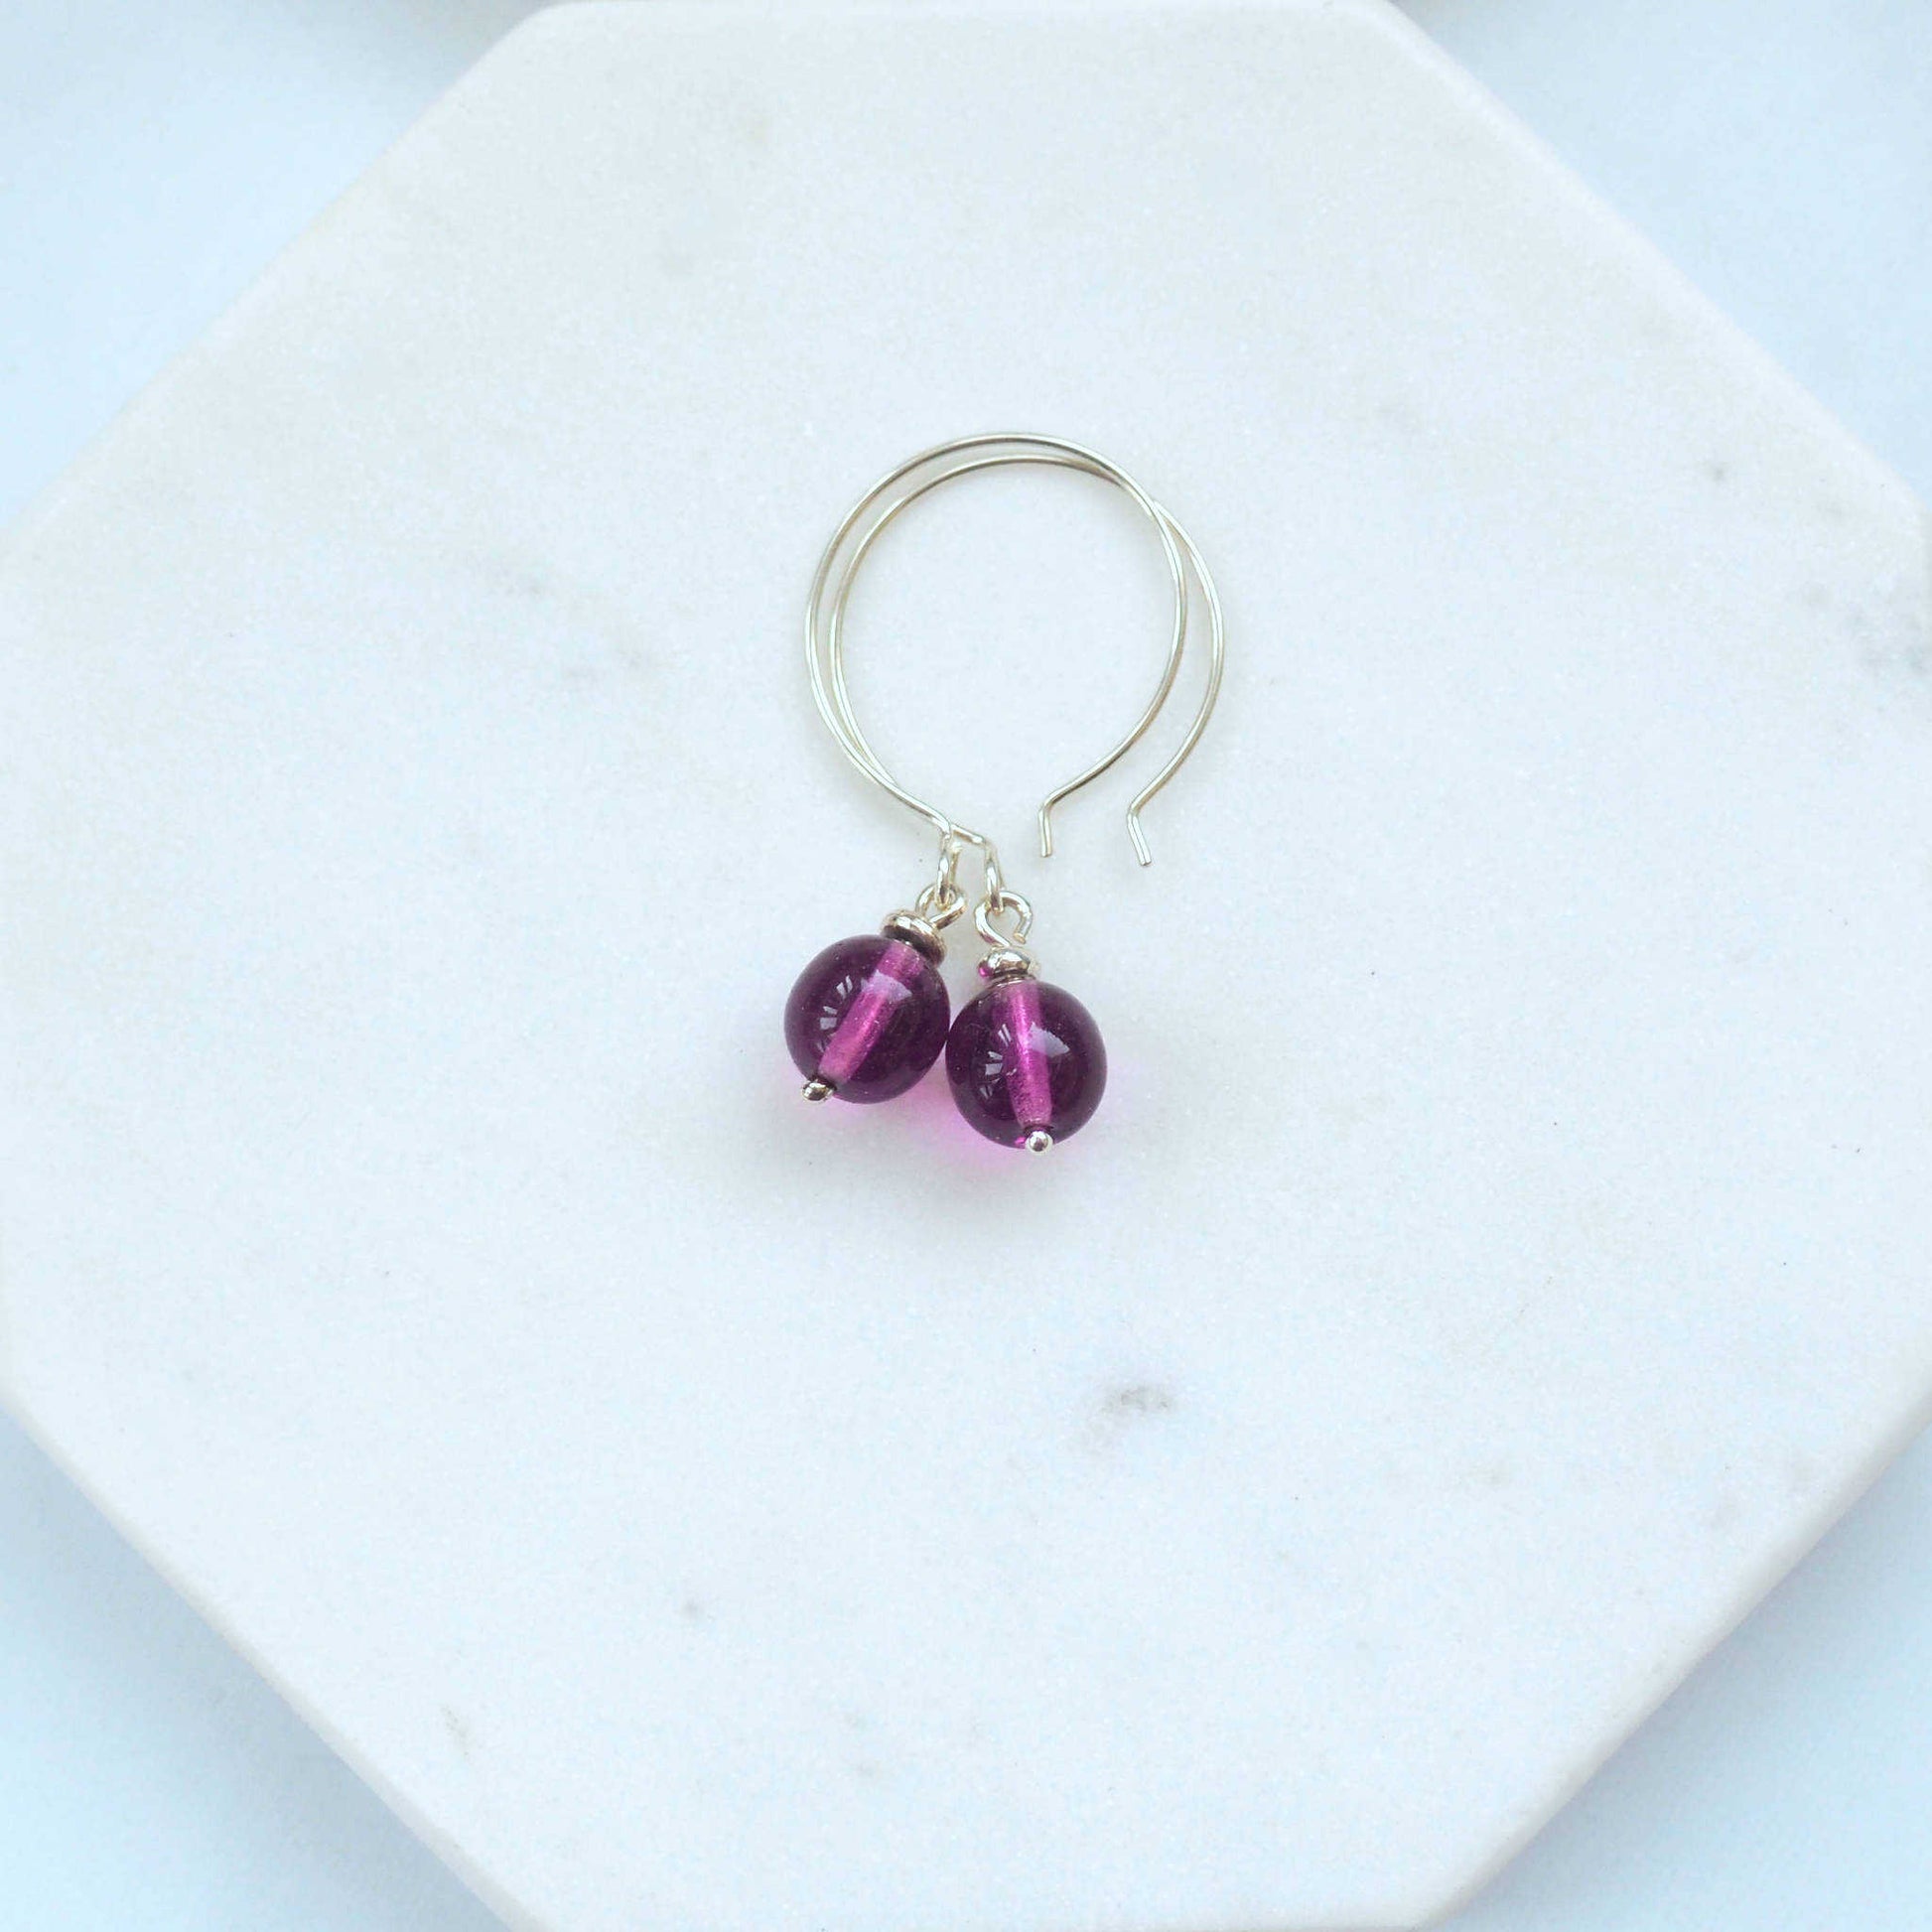 Purple Silver minimalist handmade silver hoops. Handcrafted ear wires with a round glass bead dropper. Made in Scotland by maram jewellery